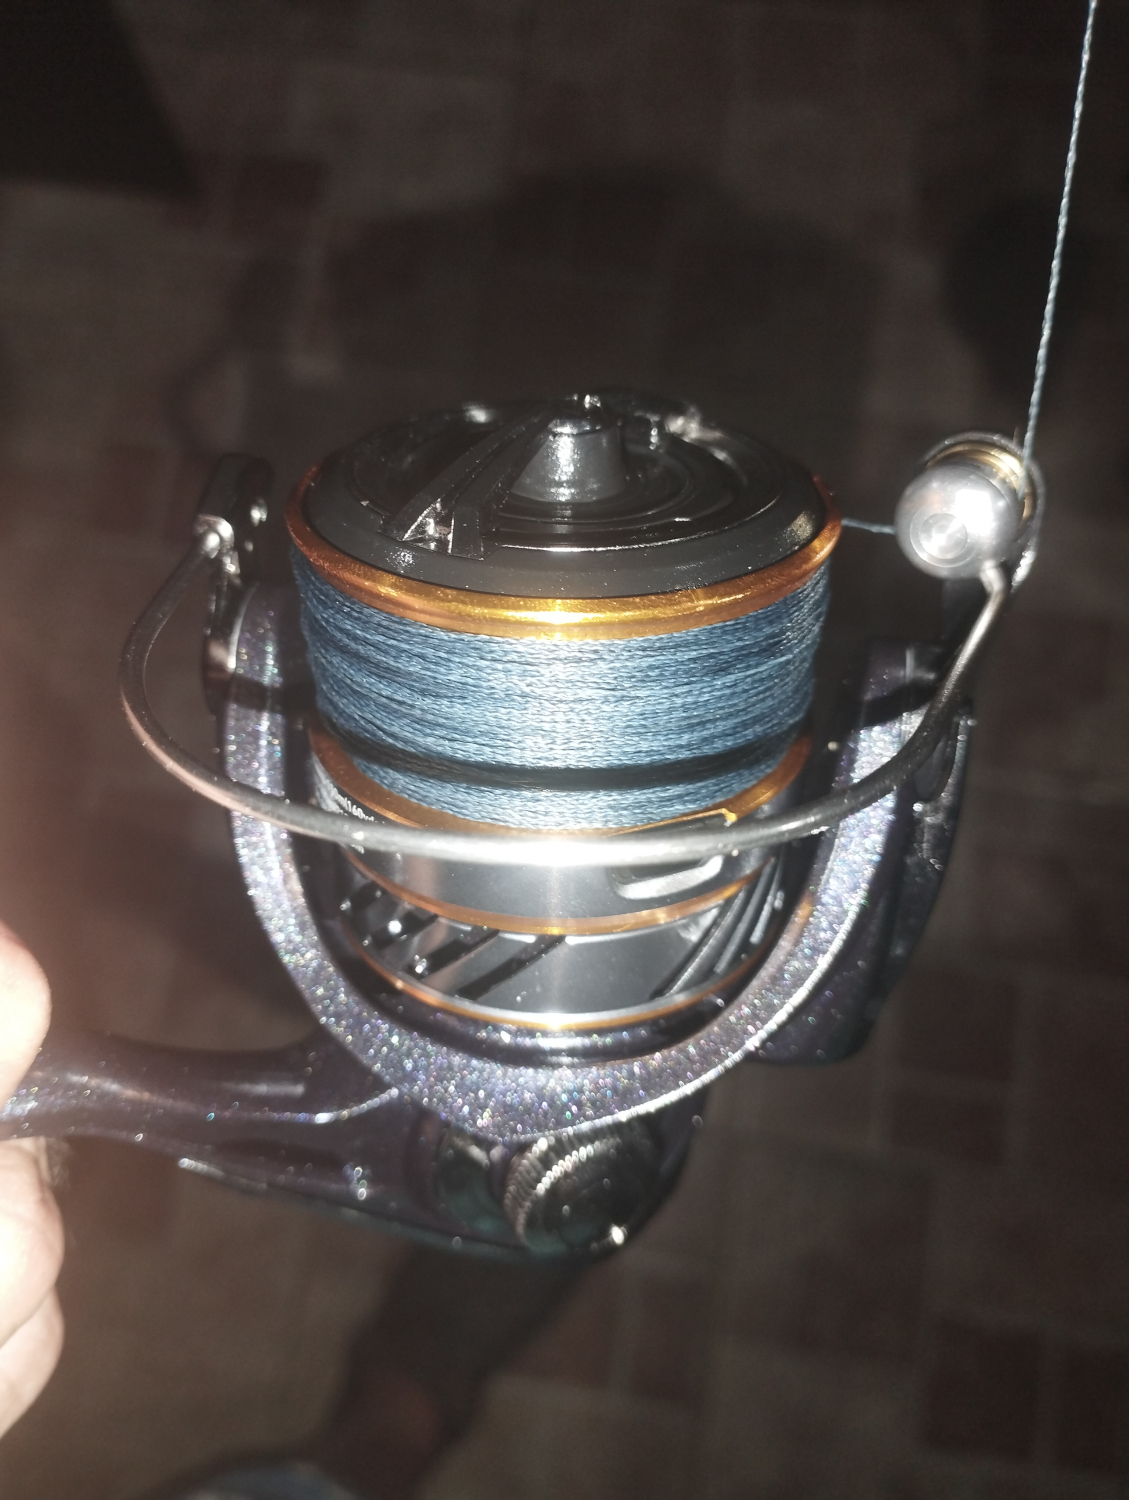 Spinning Reel Daiwa Revros LT - Nootica - Water addicts, like you!